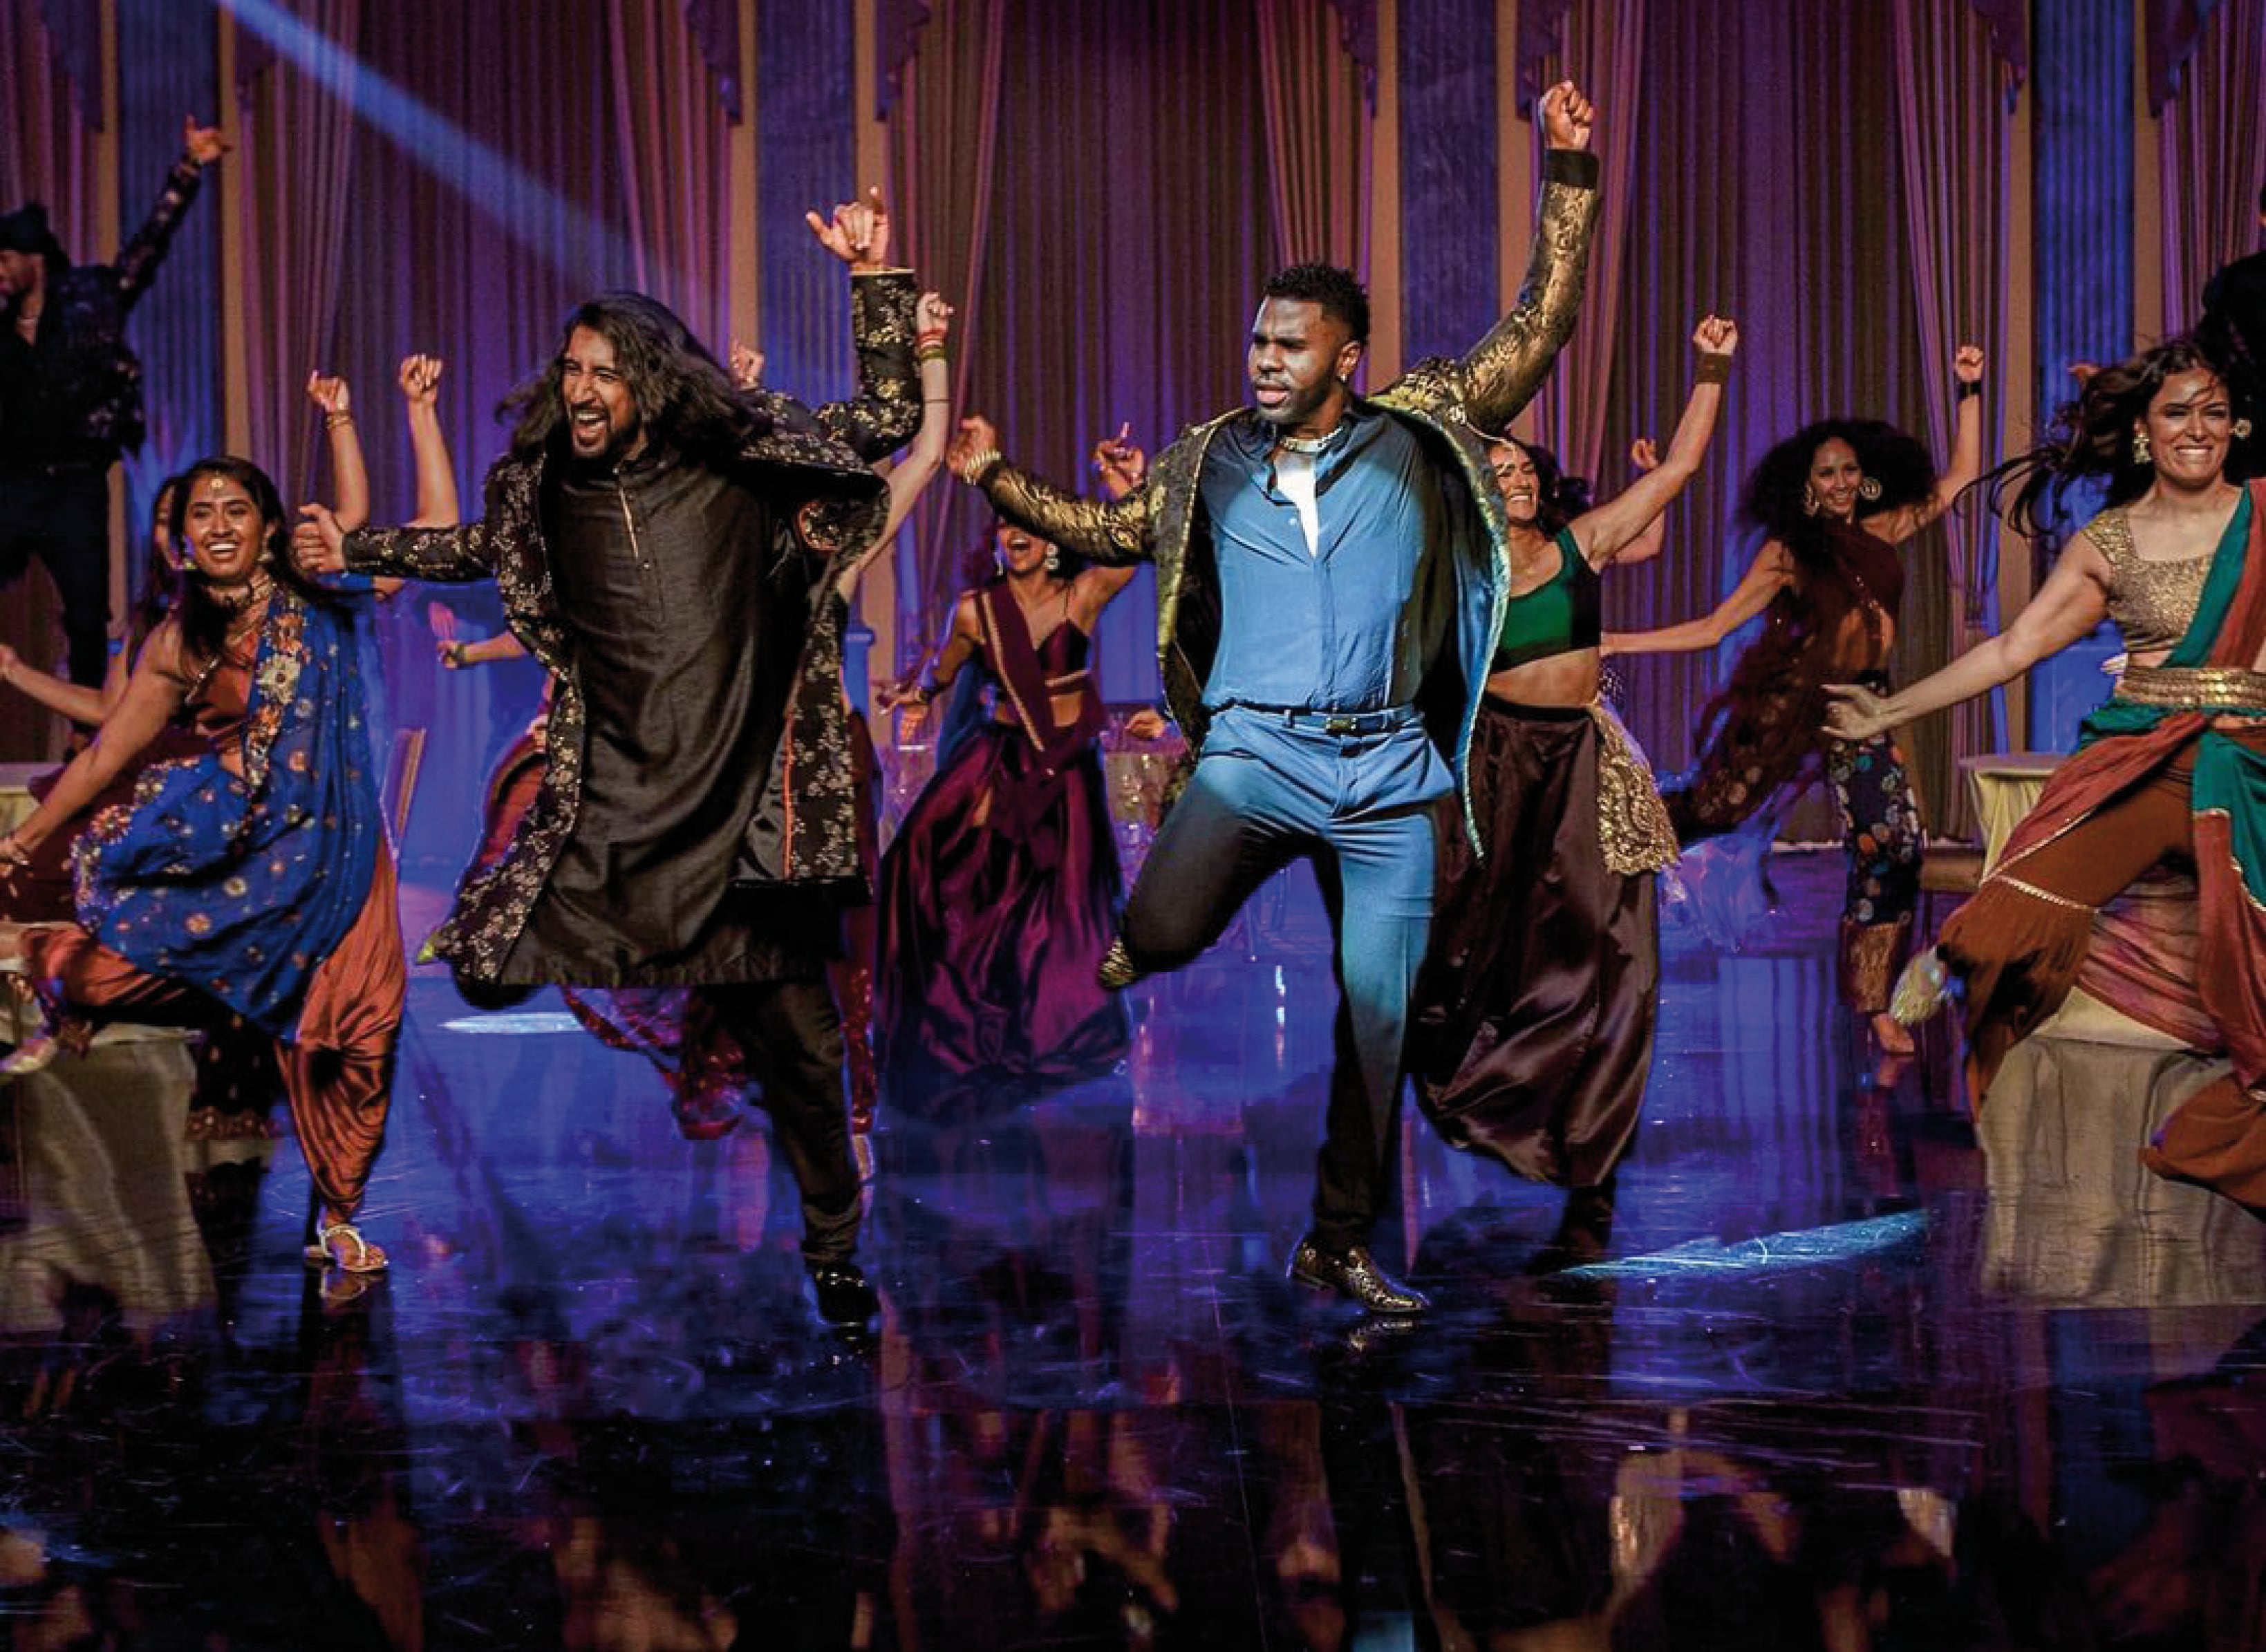 A still from the Jalebi Baby video featuring Tesher and Jason Derulo doing bhangra